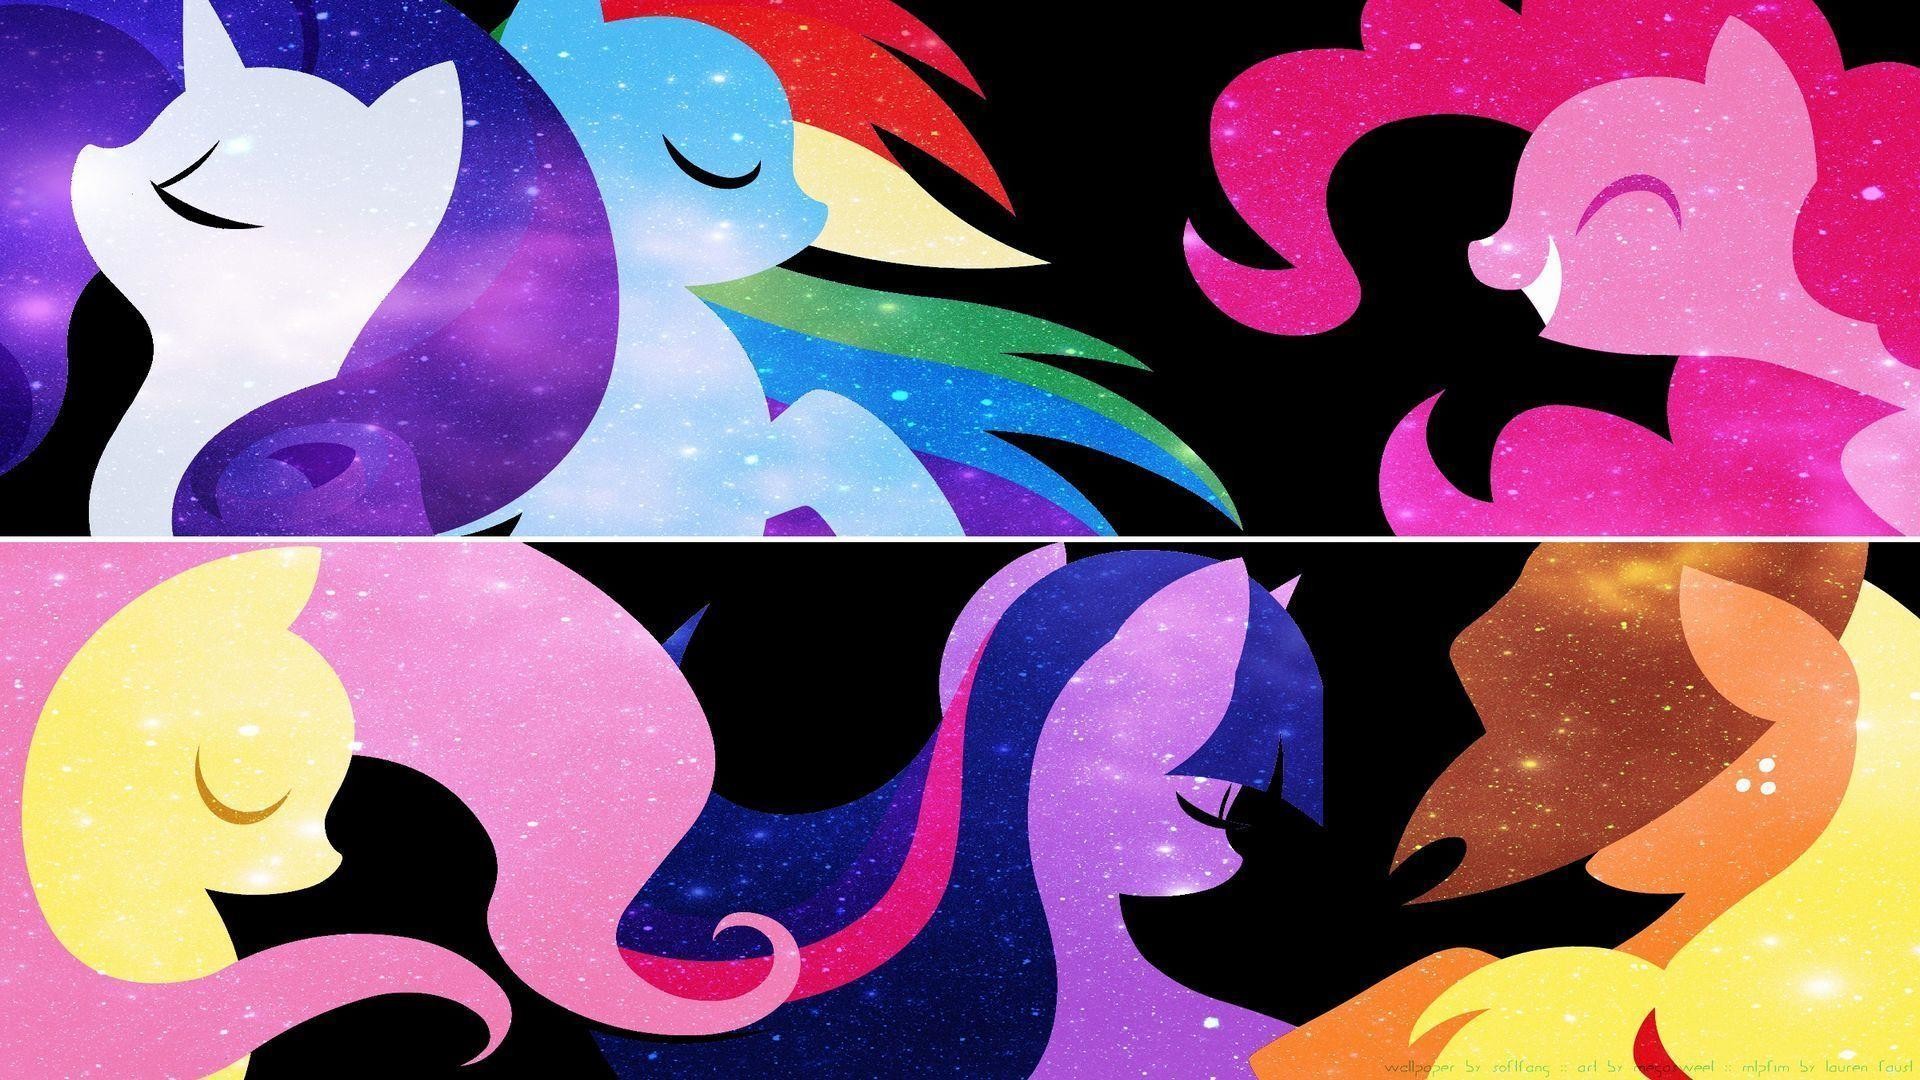 my little pony wallpaper android,pattern,purple,text,graphic design,design